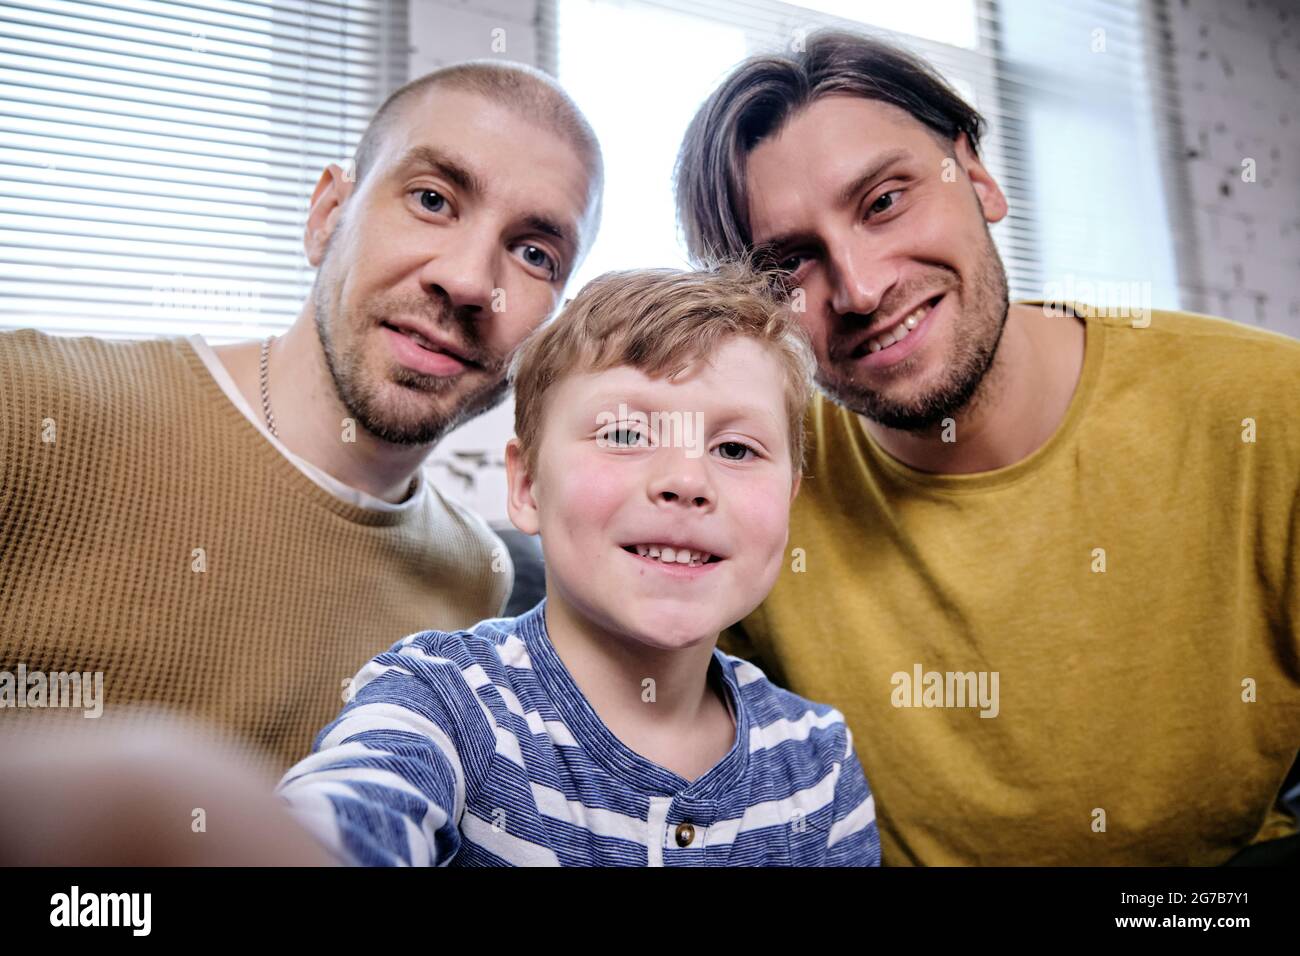 Positive preteen boy taking selfie with his two smiling fathers to post of social media Stock Photo